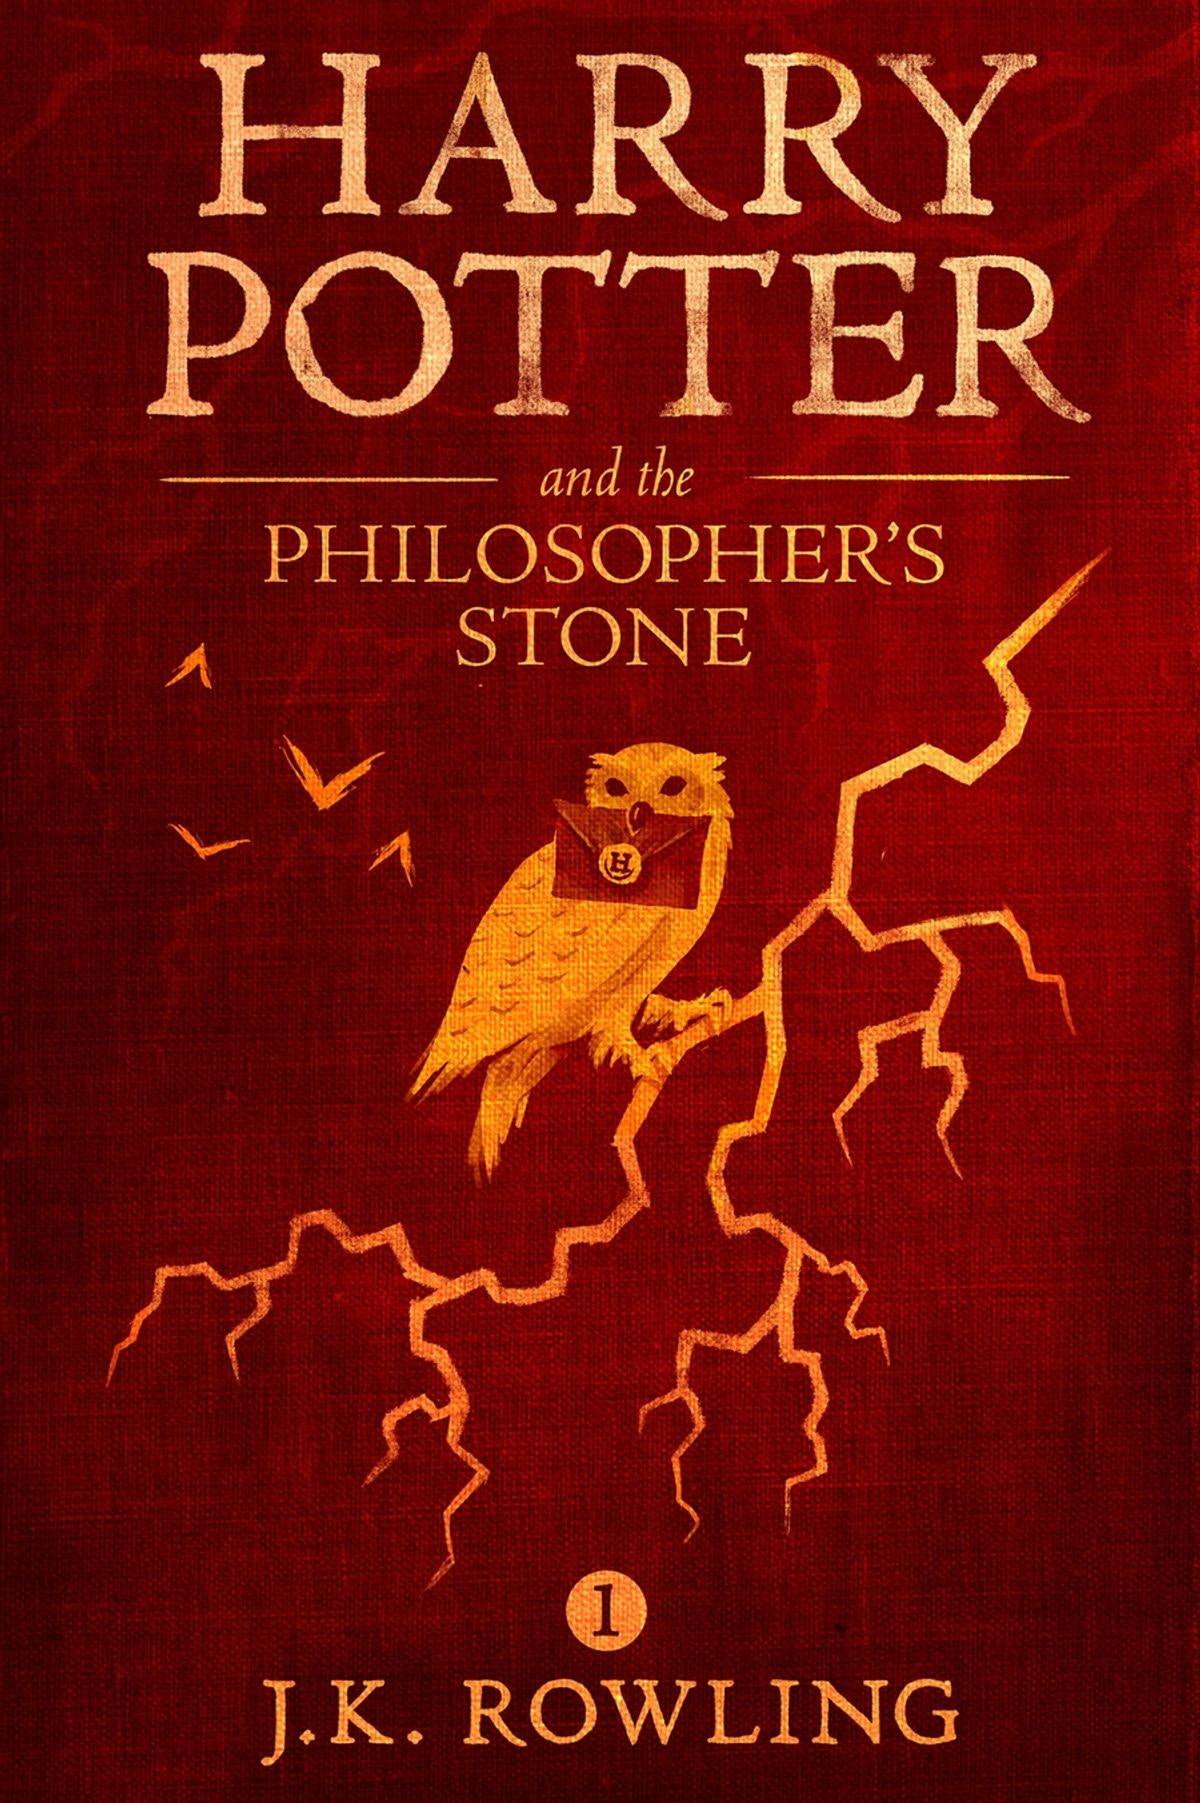 Harry Potter and the Philosopher's Stone – J.K. Rowling